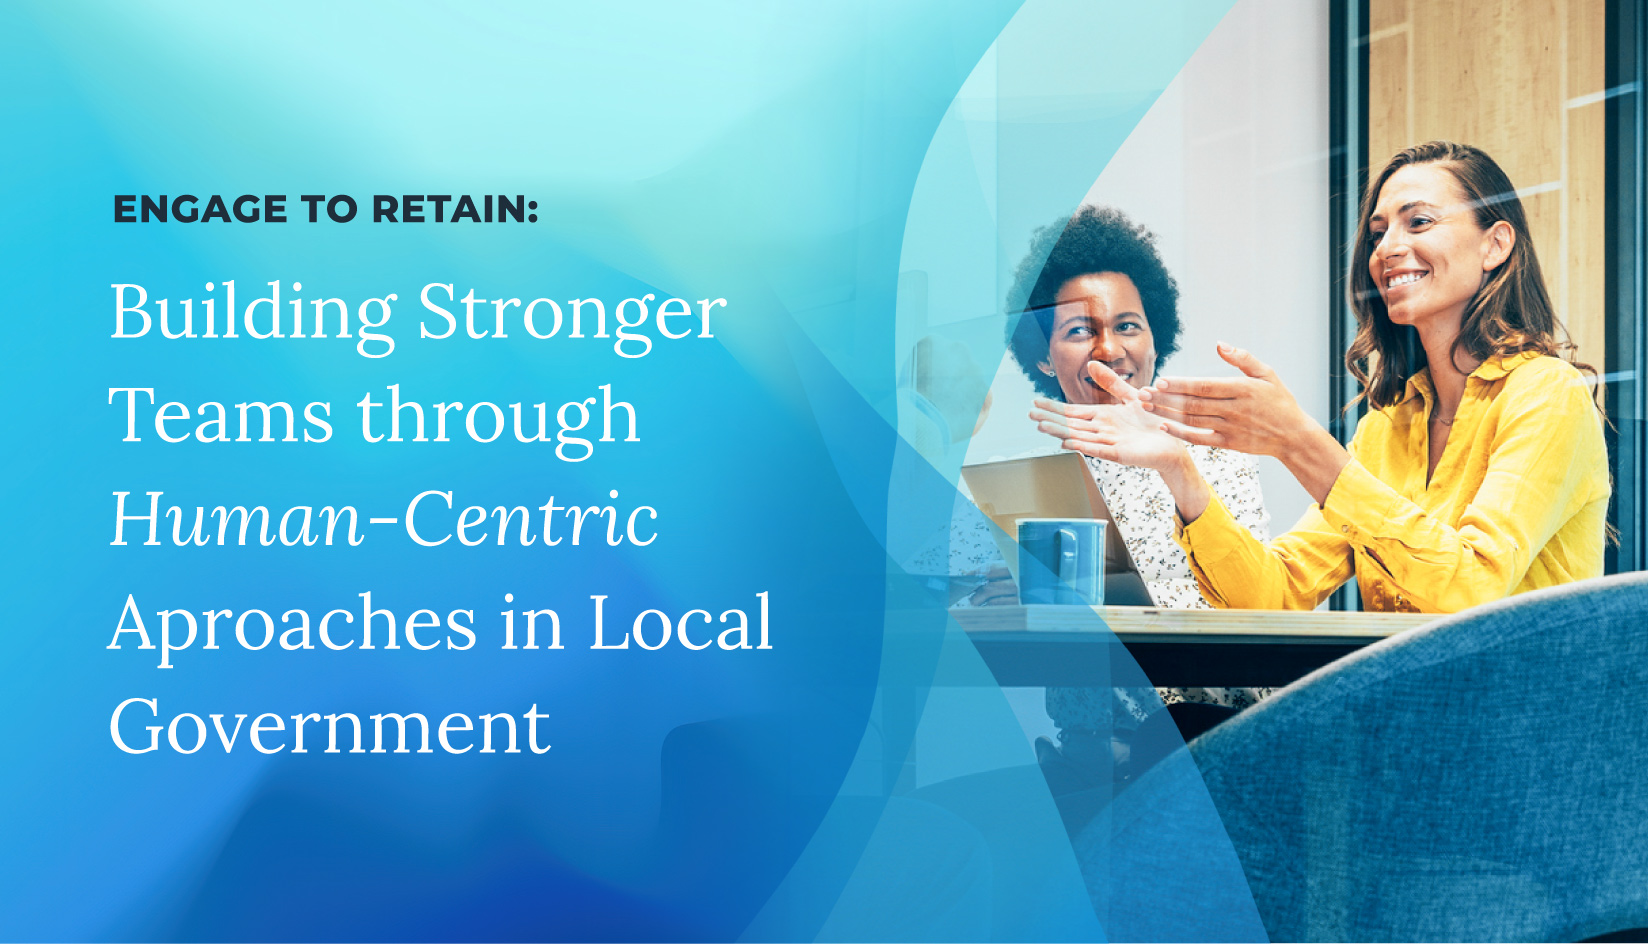 Engage to Retain: Building Stronger Teams Through Human-Centric Approaches in Local Government